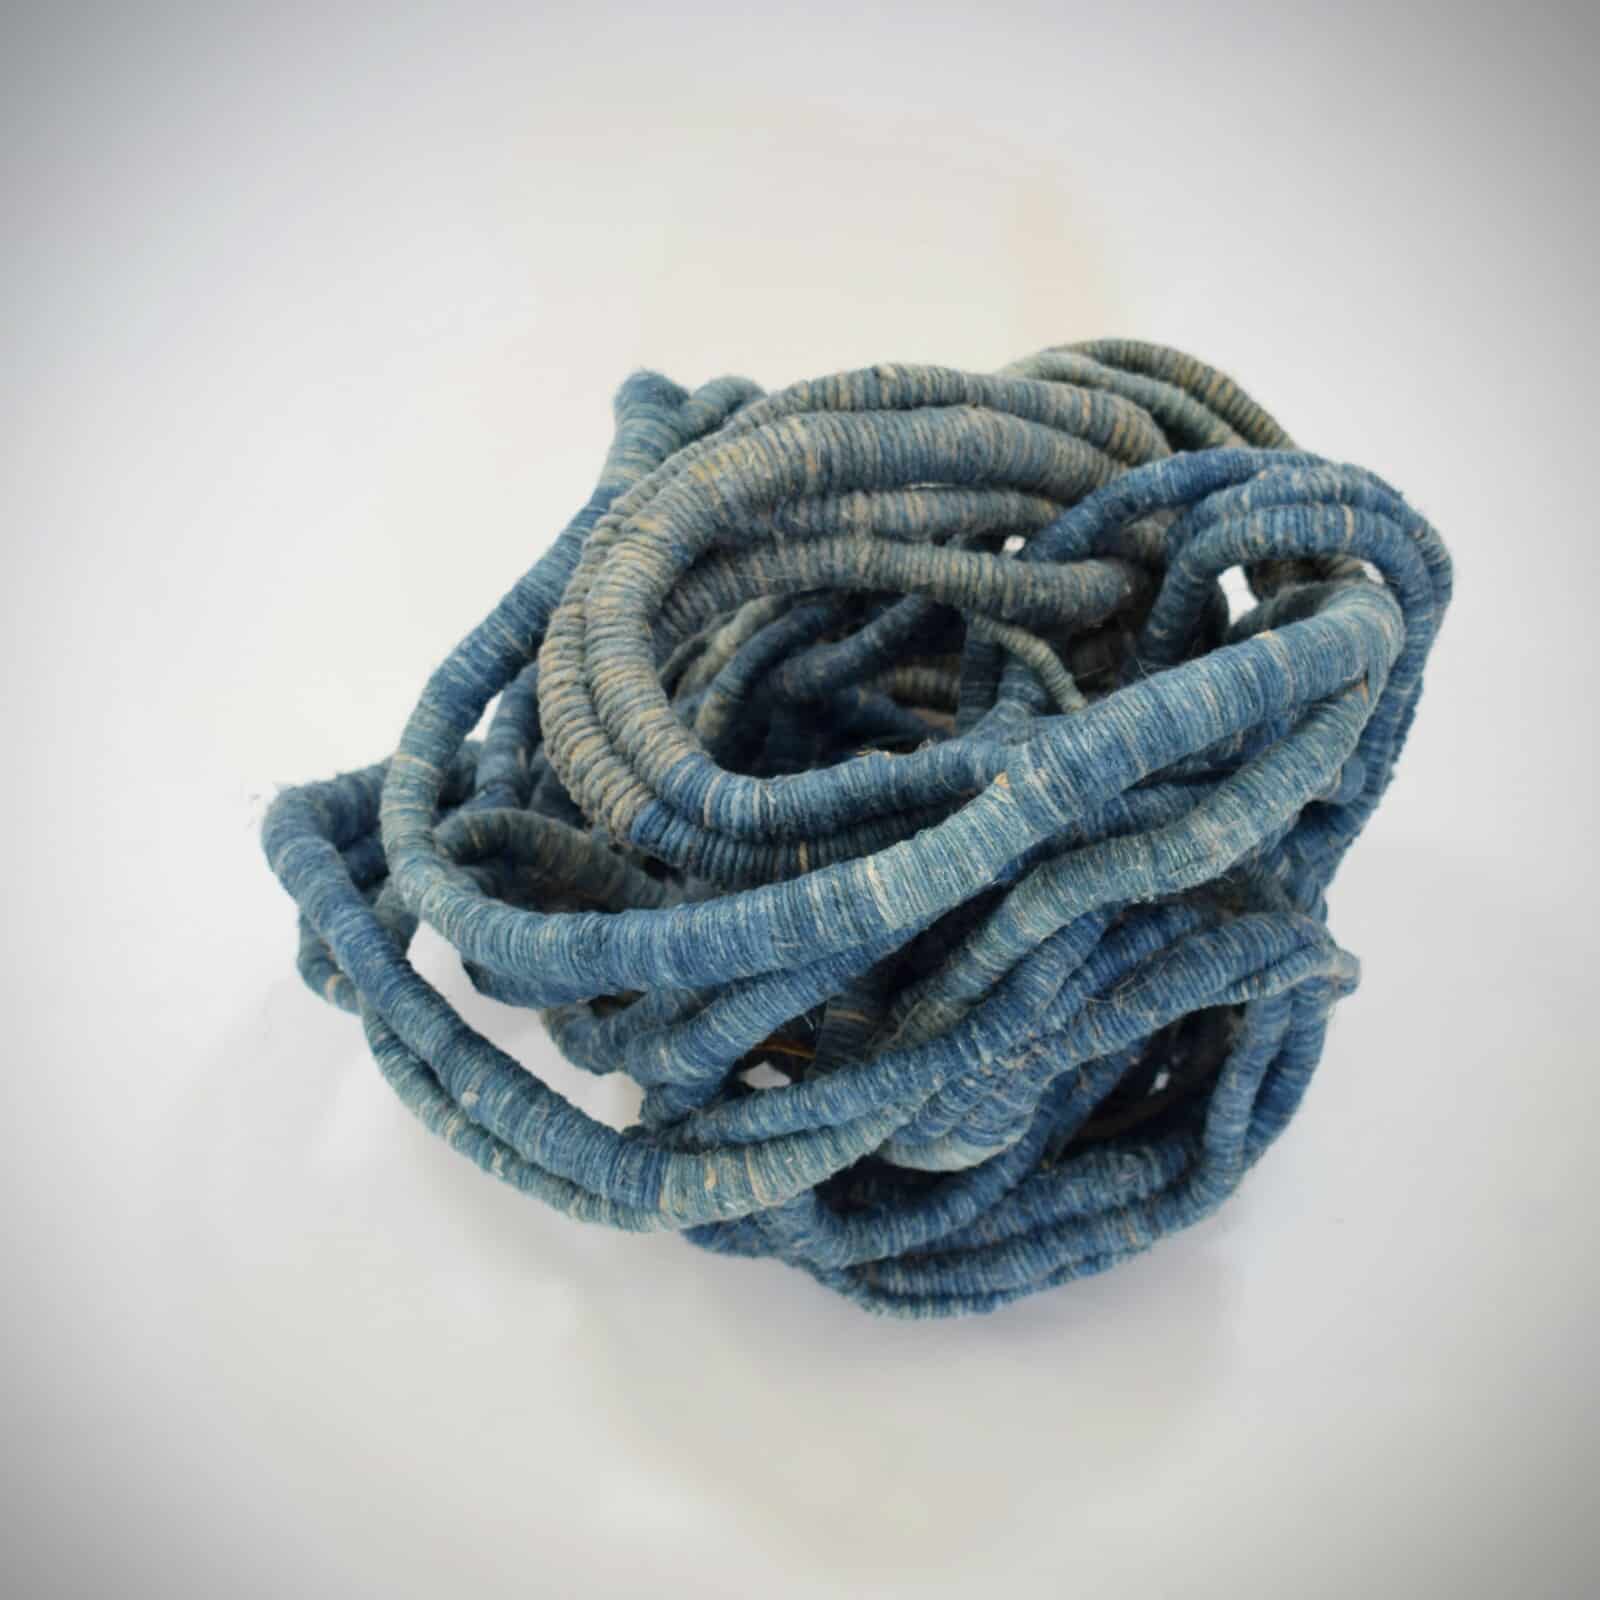 sculpture made of linen dyed natural indigo pigments by Aude Franjou